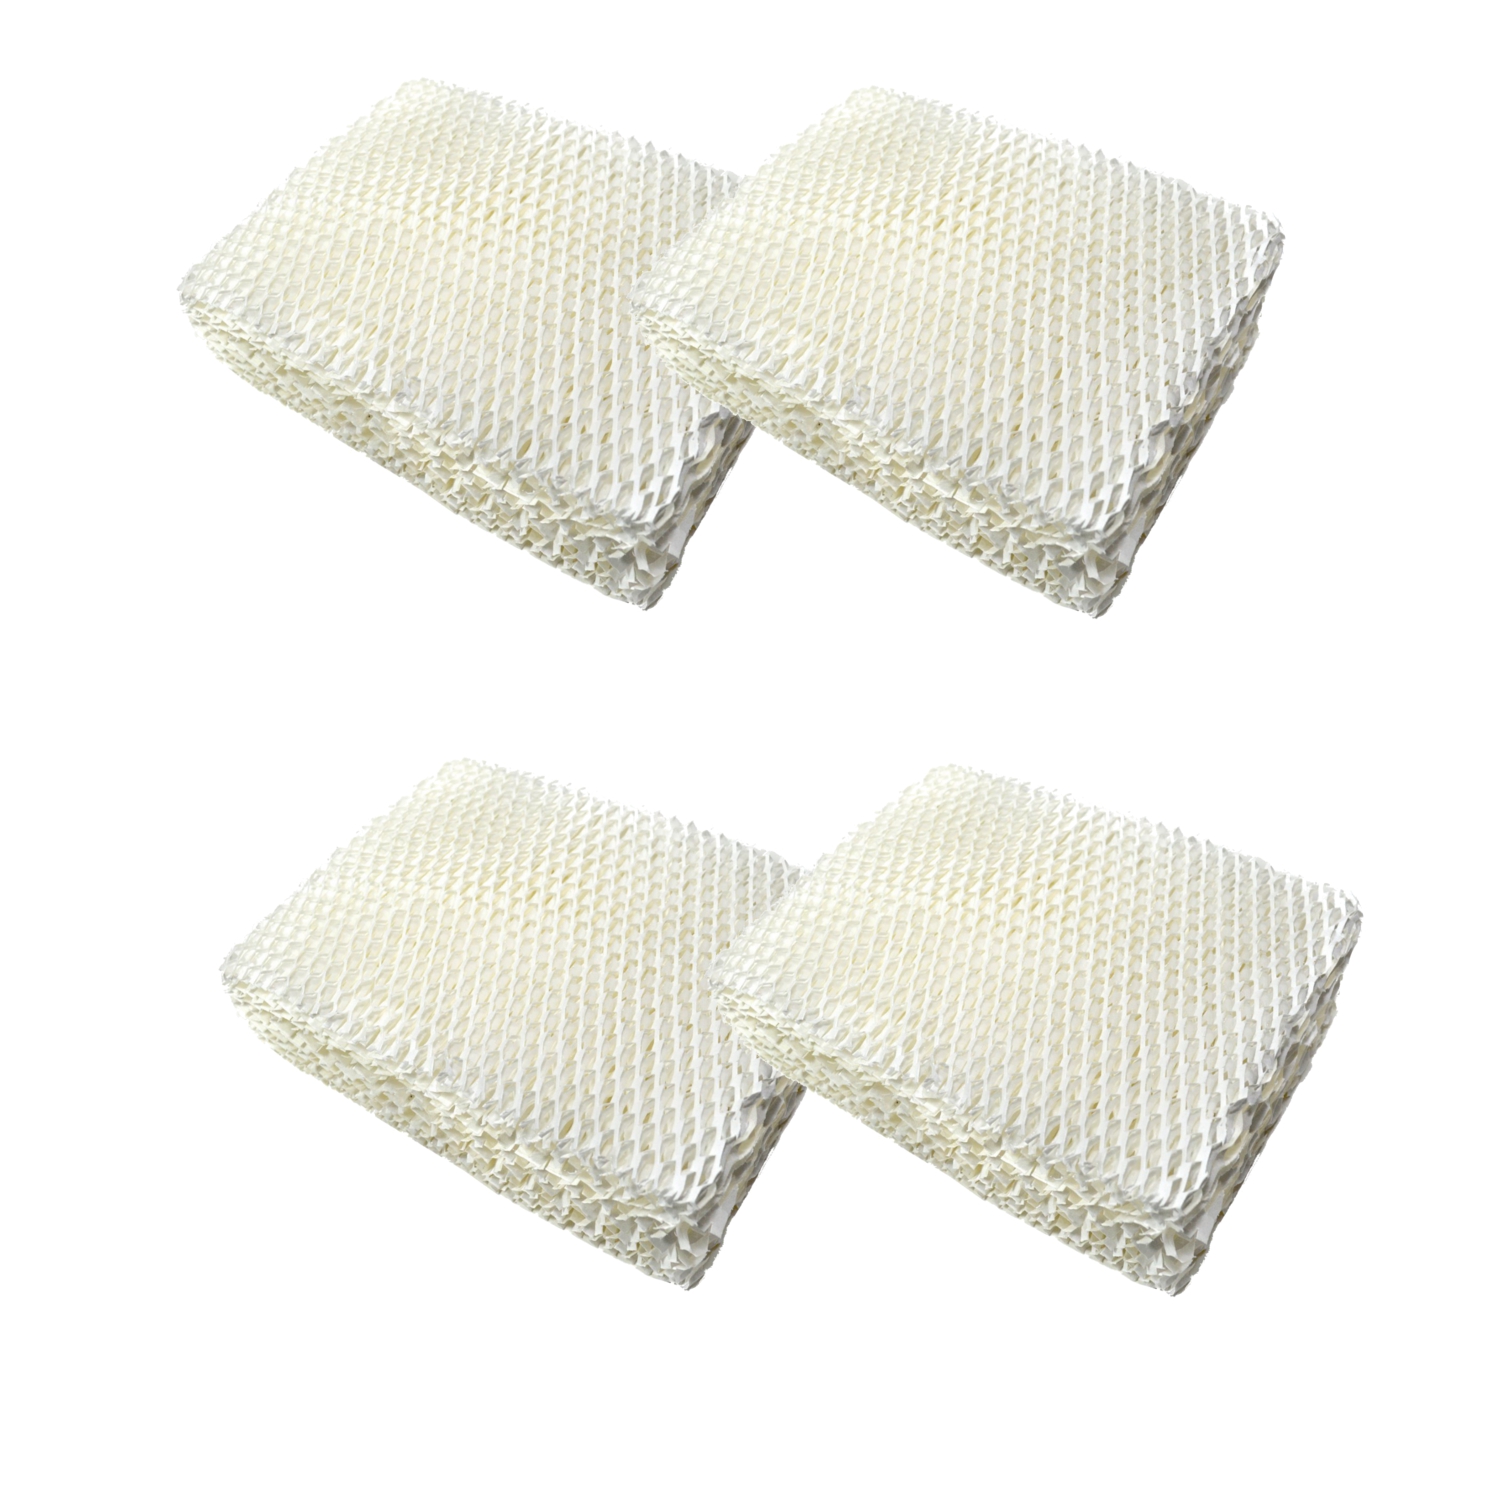 HQRP 4-Pack Wick Filter for Kenmore 32-14911; Canadian Kenmore 29973, 29975, 29985, 29986, 29987, 29614, 29802 Humidifier